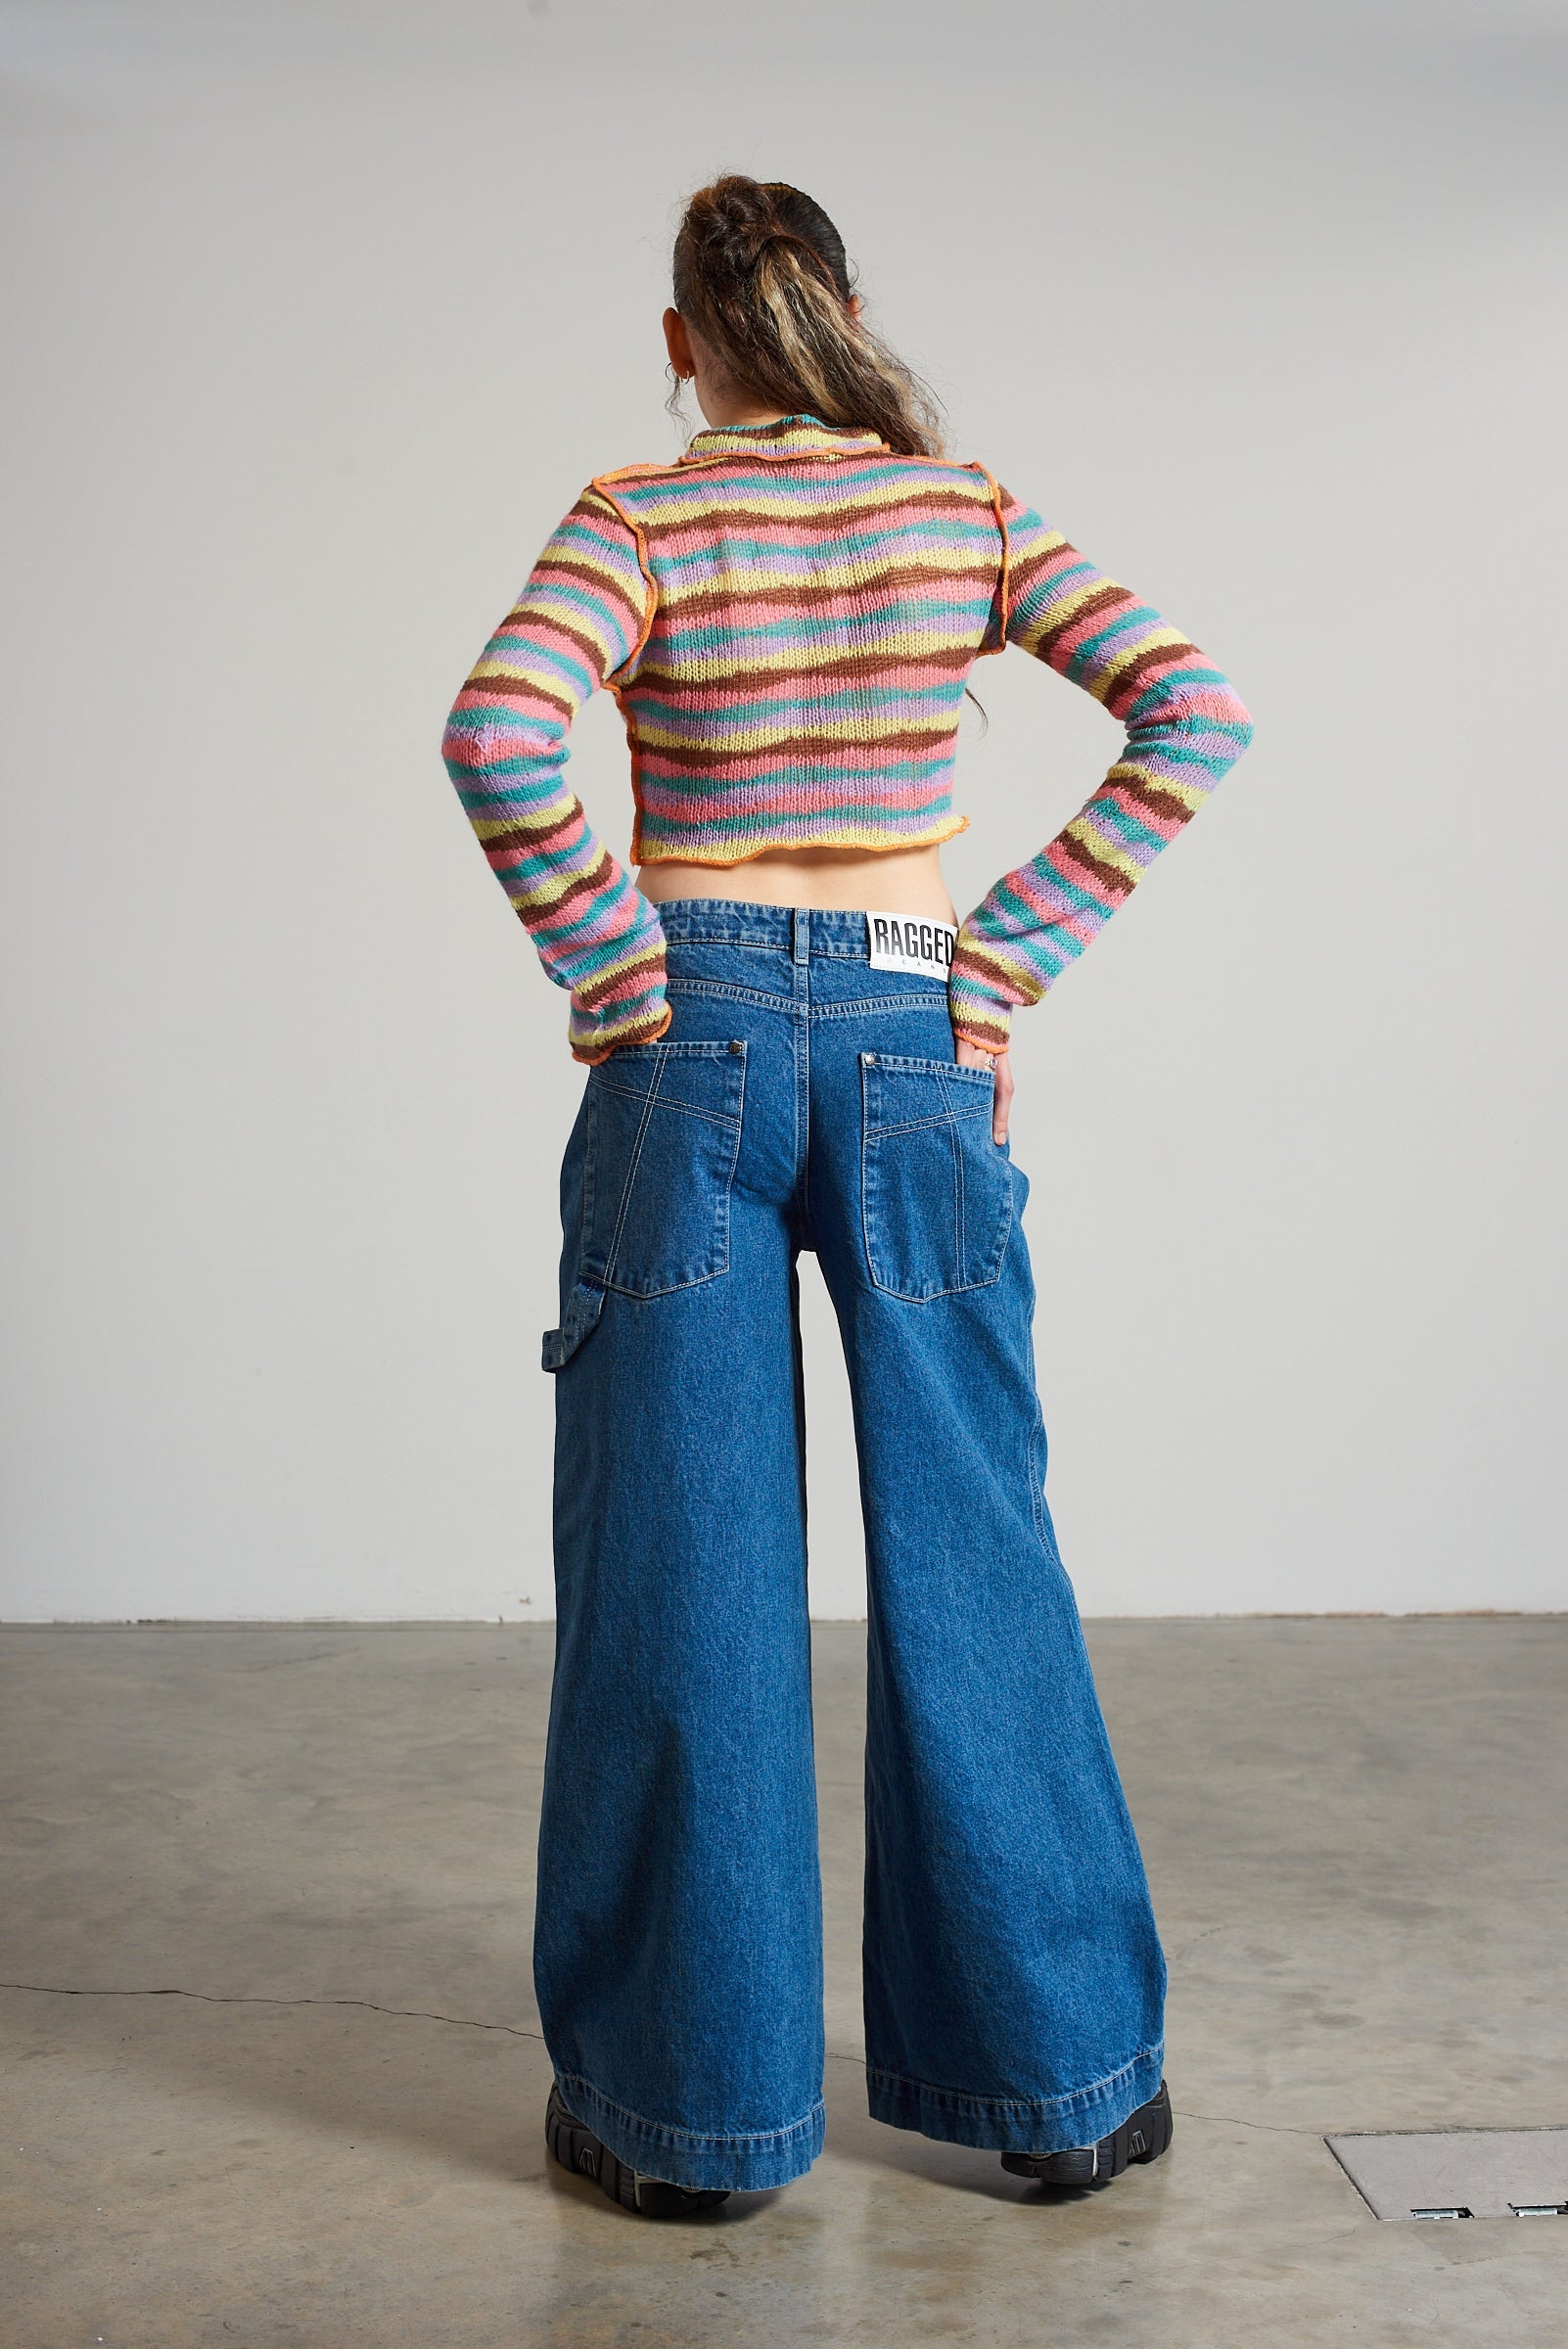 Vicious Knit Top Ragged Jeans